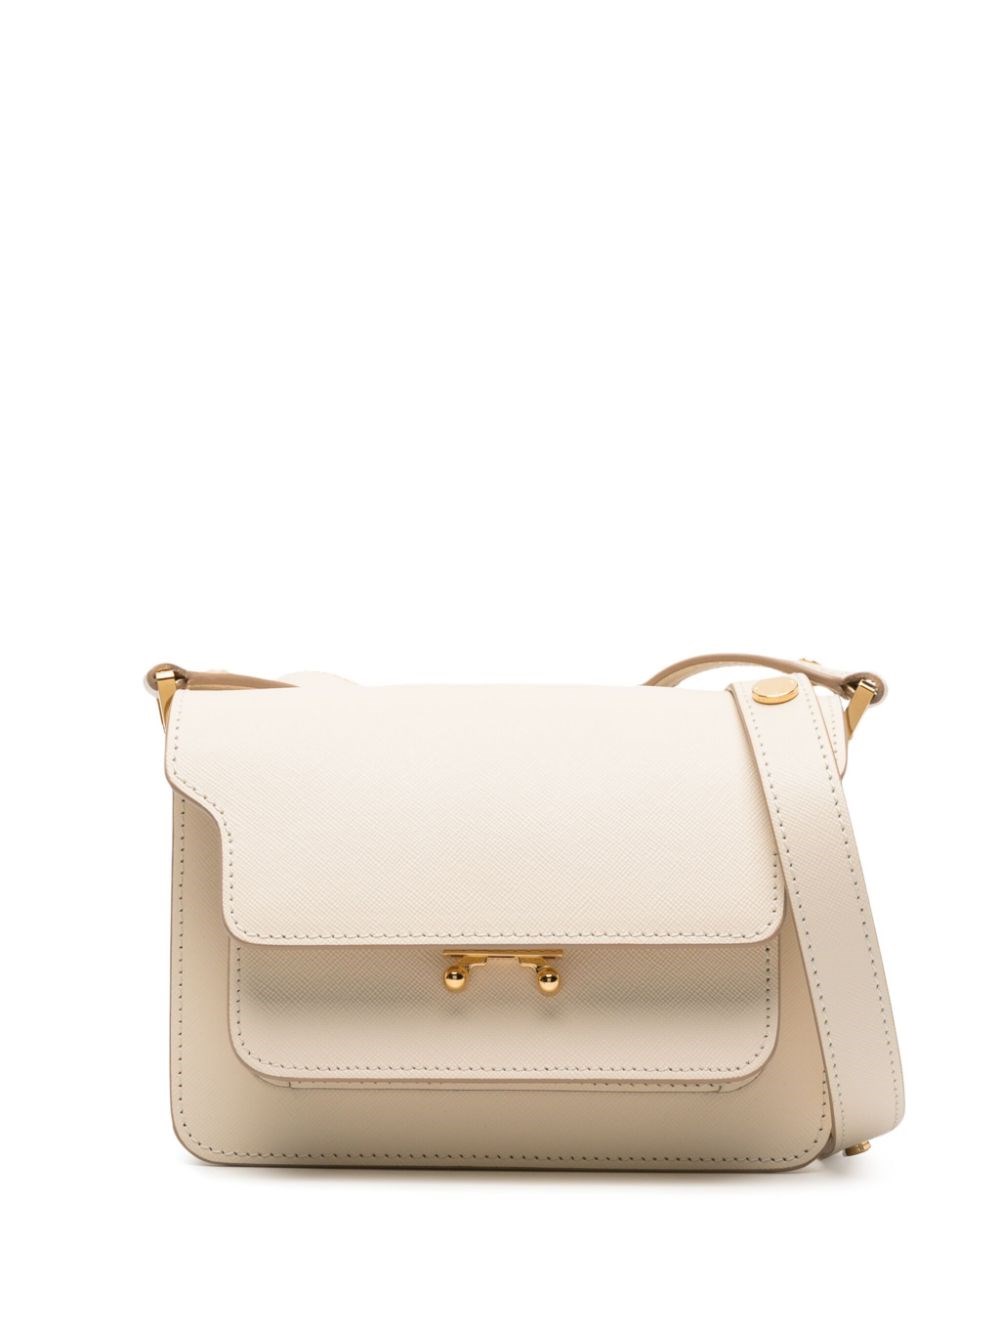 Marni Trunk Shoulder Bag In Leather In Nude & Neutrals